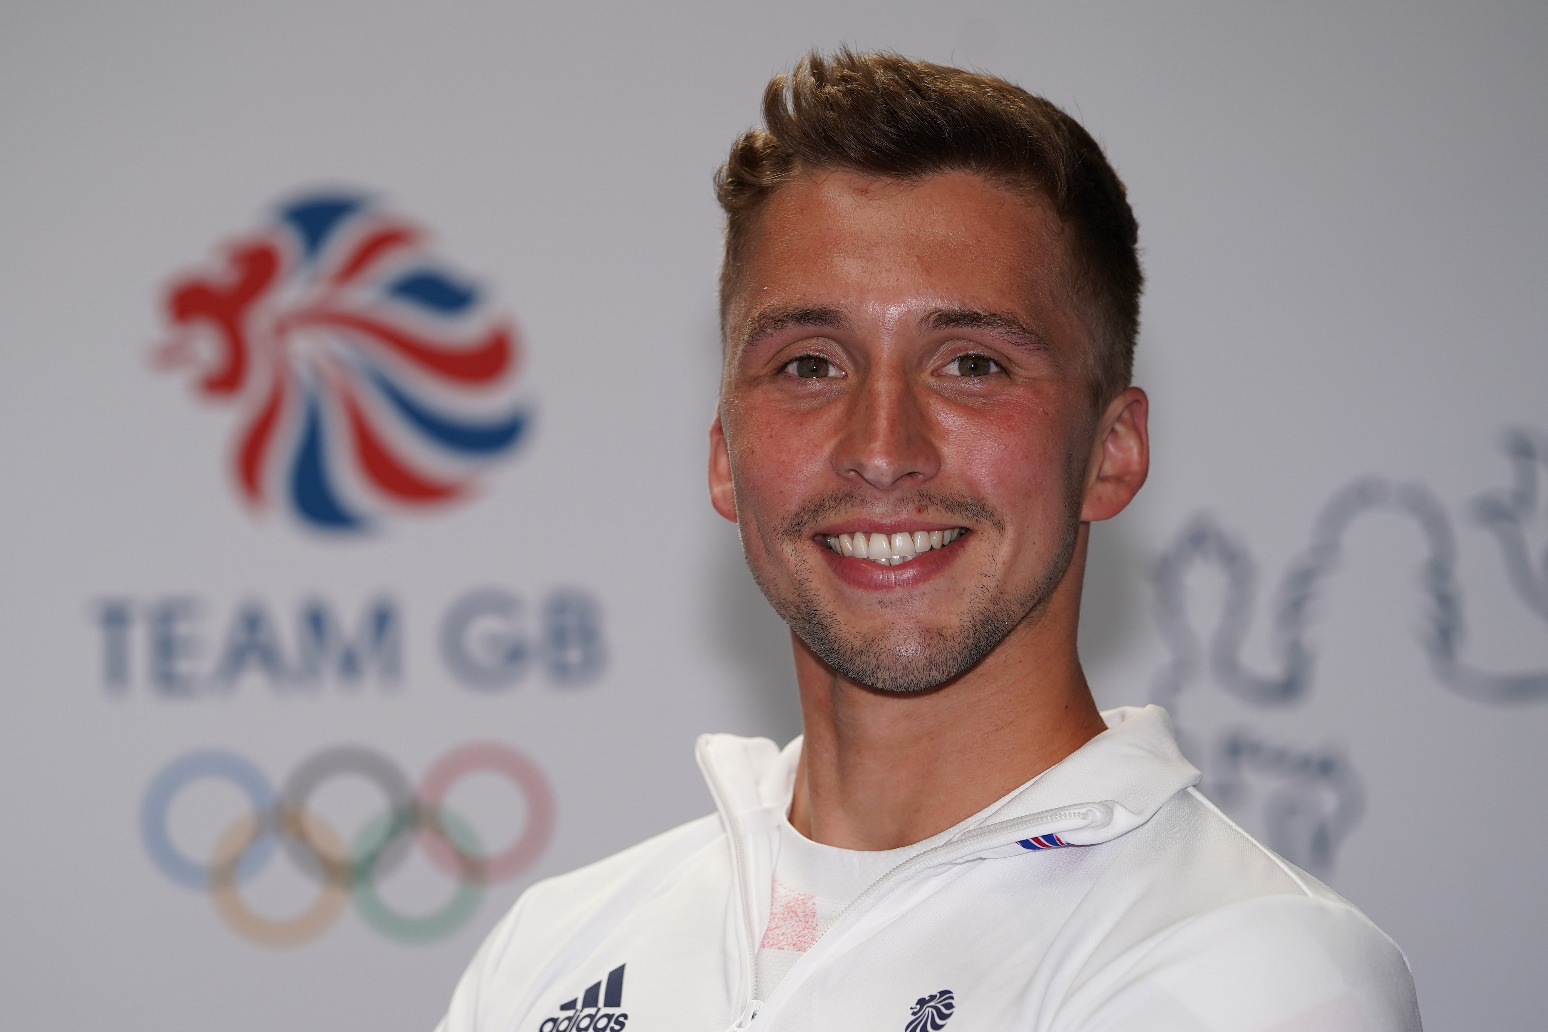 Swimmer Dan Jervis comes out as gay ahead of Commonwealth Games 